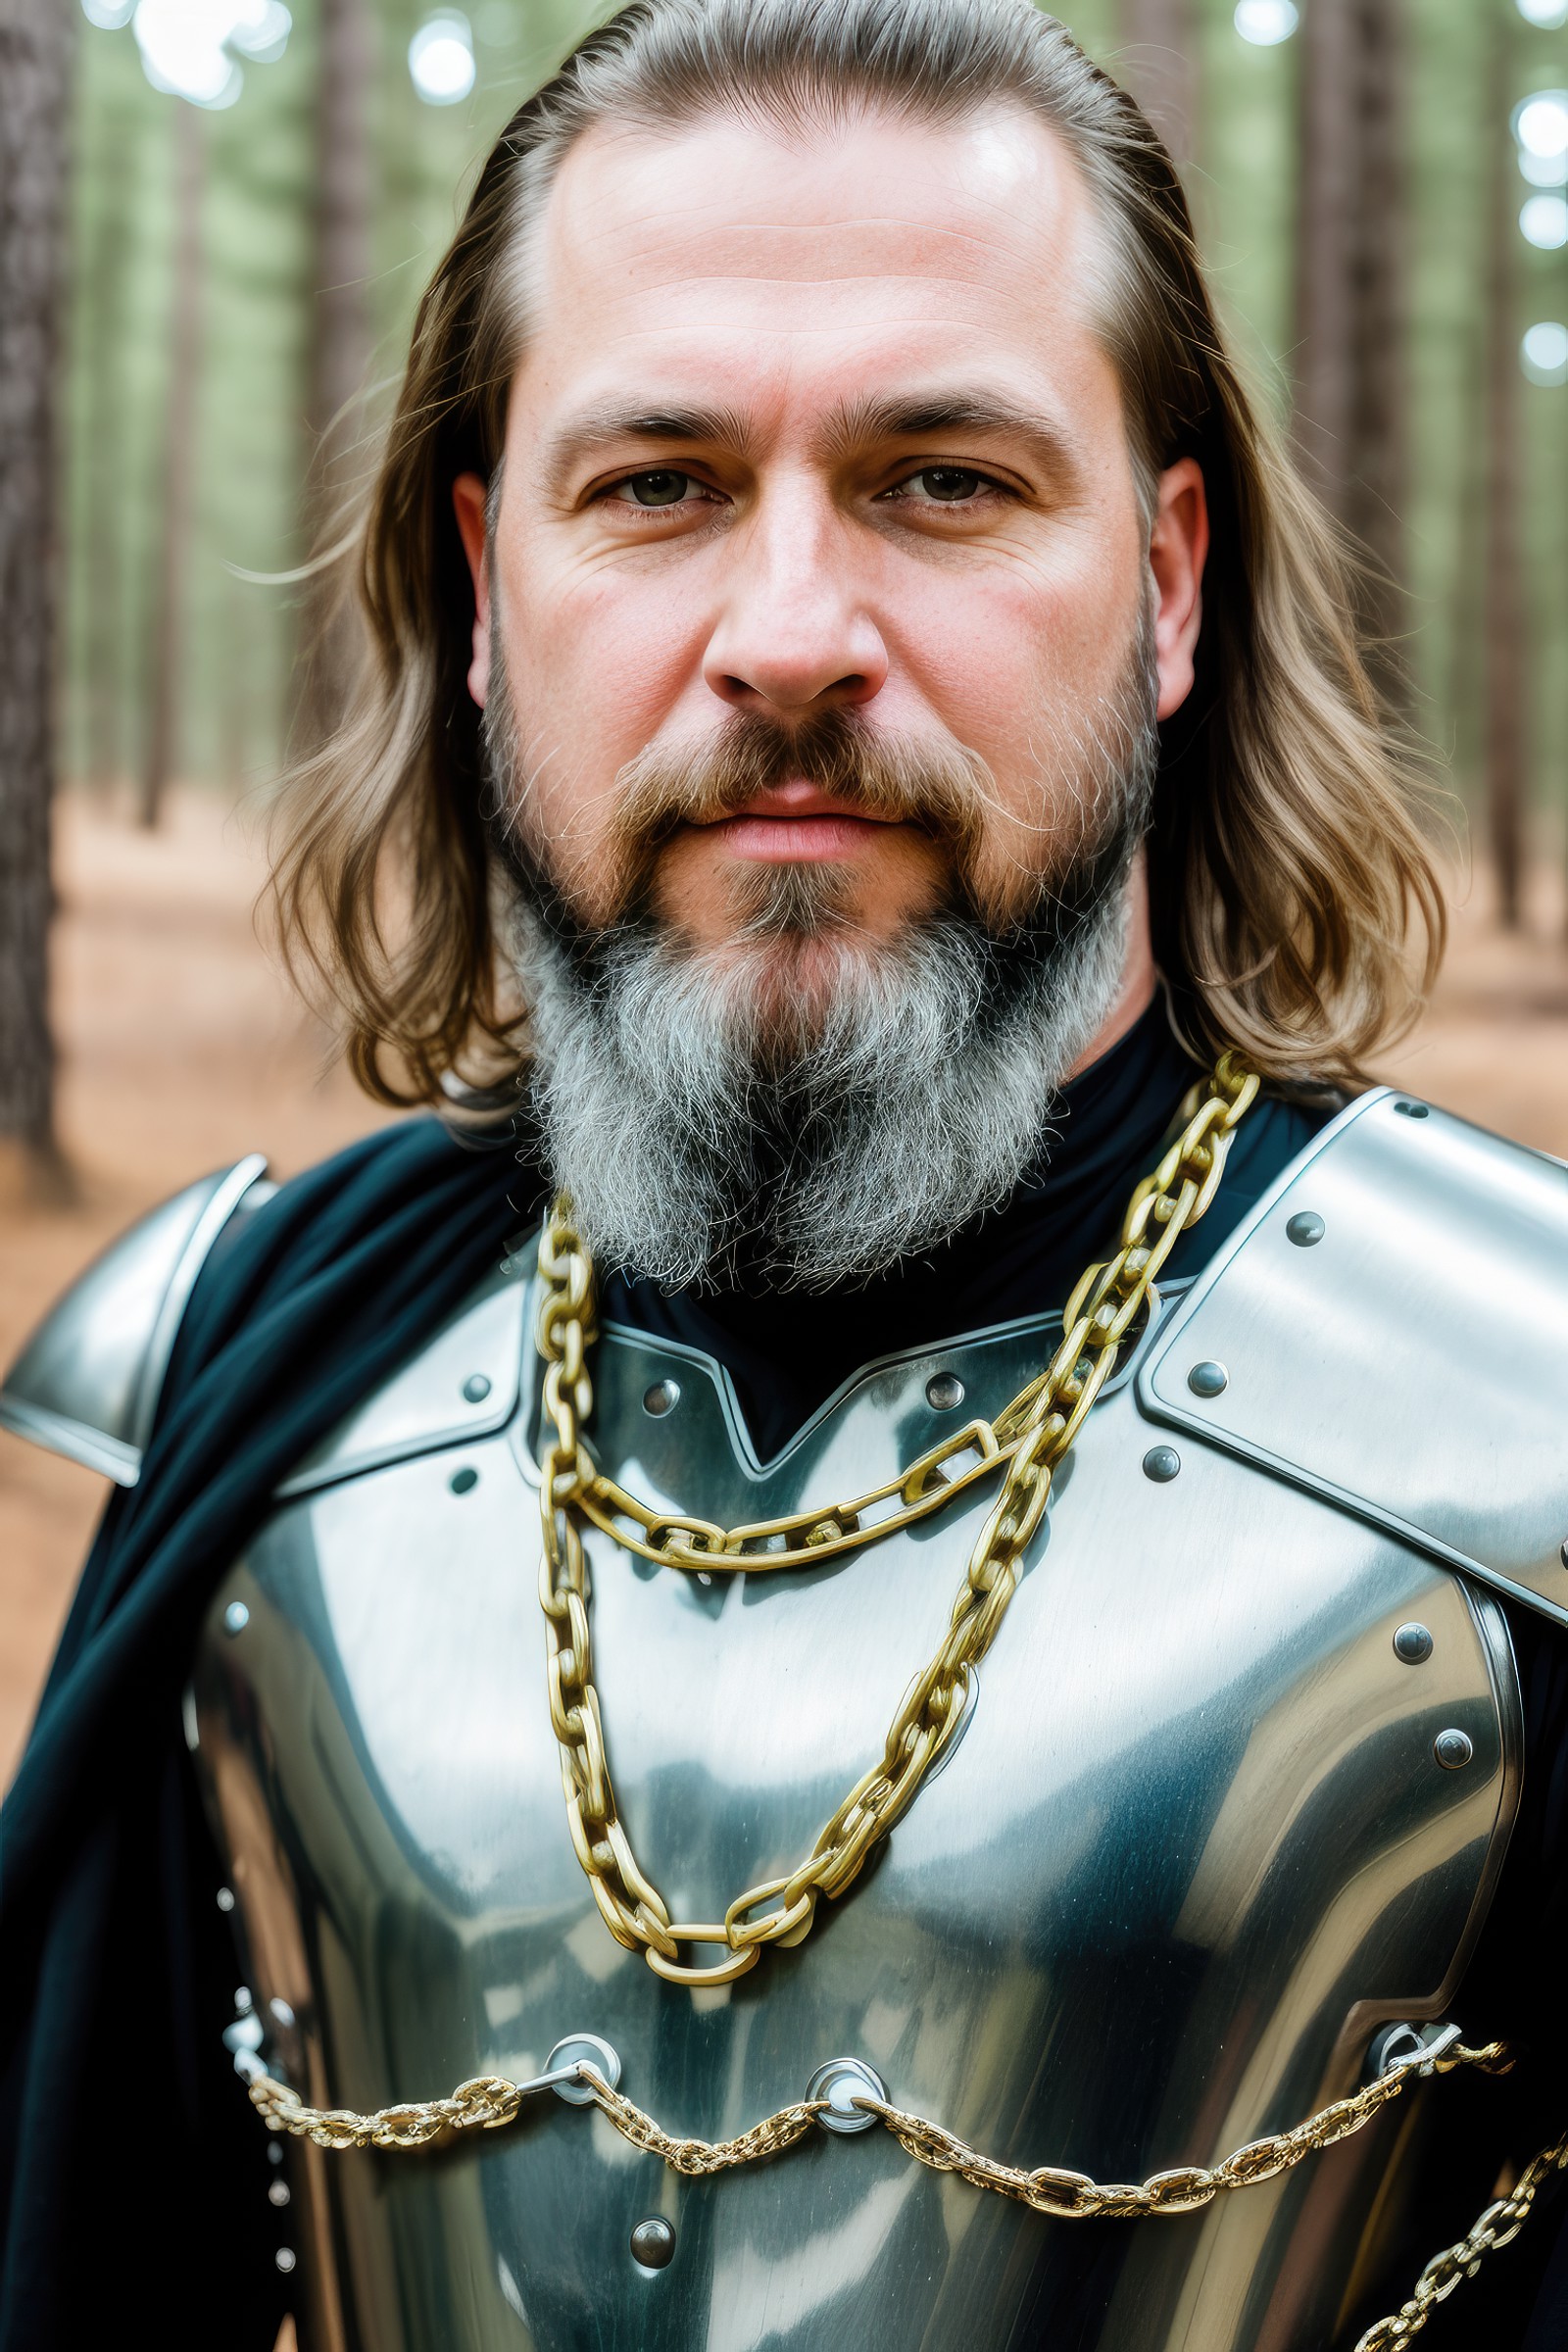 RAW photo, a close up portrait photo of 50 y.o man with beard, in chain armor clothes, long haircut, pale skin, slim body,...